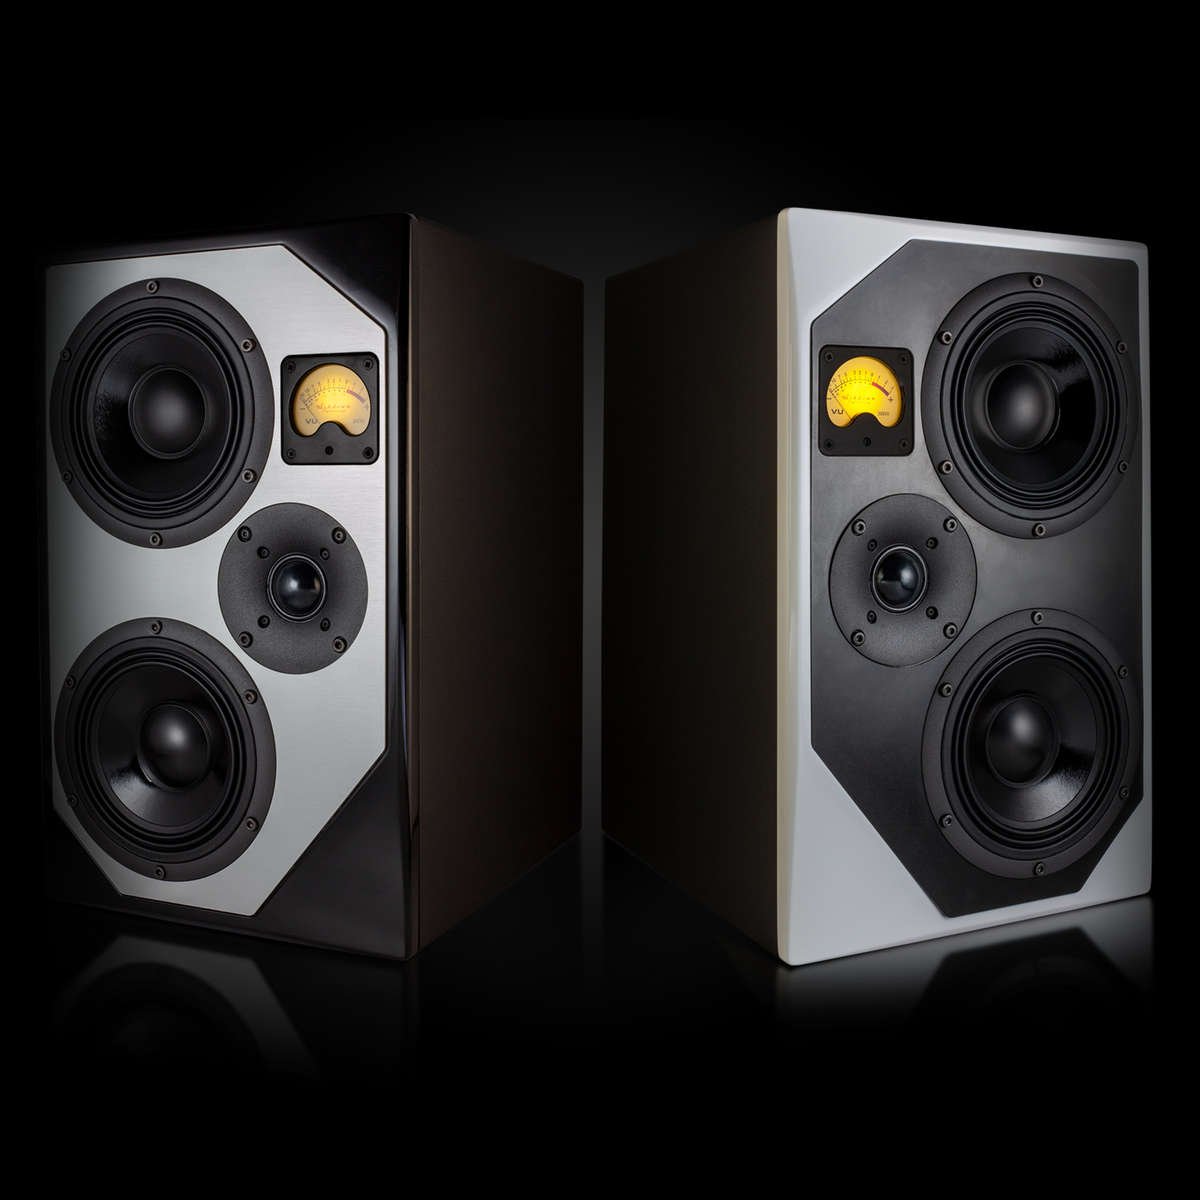 Ashdown nfp 2 pro studio monitor black and white side by side